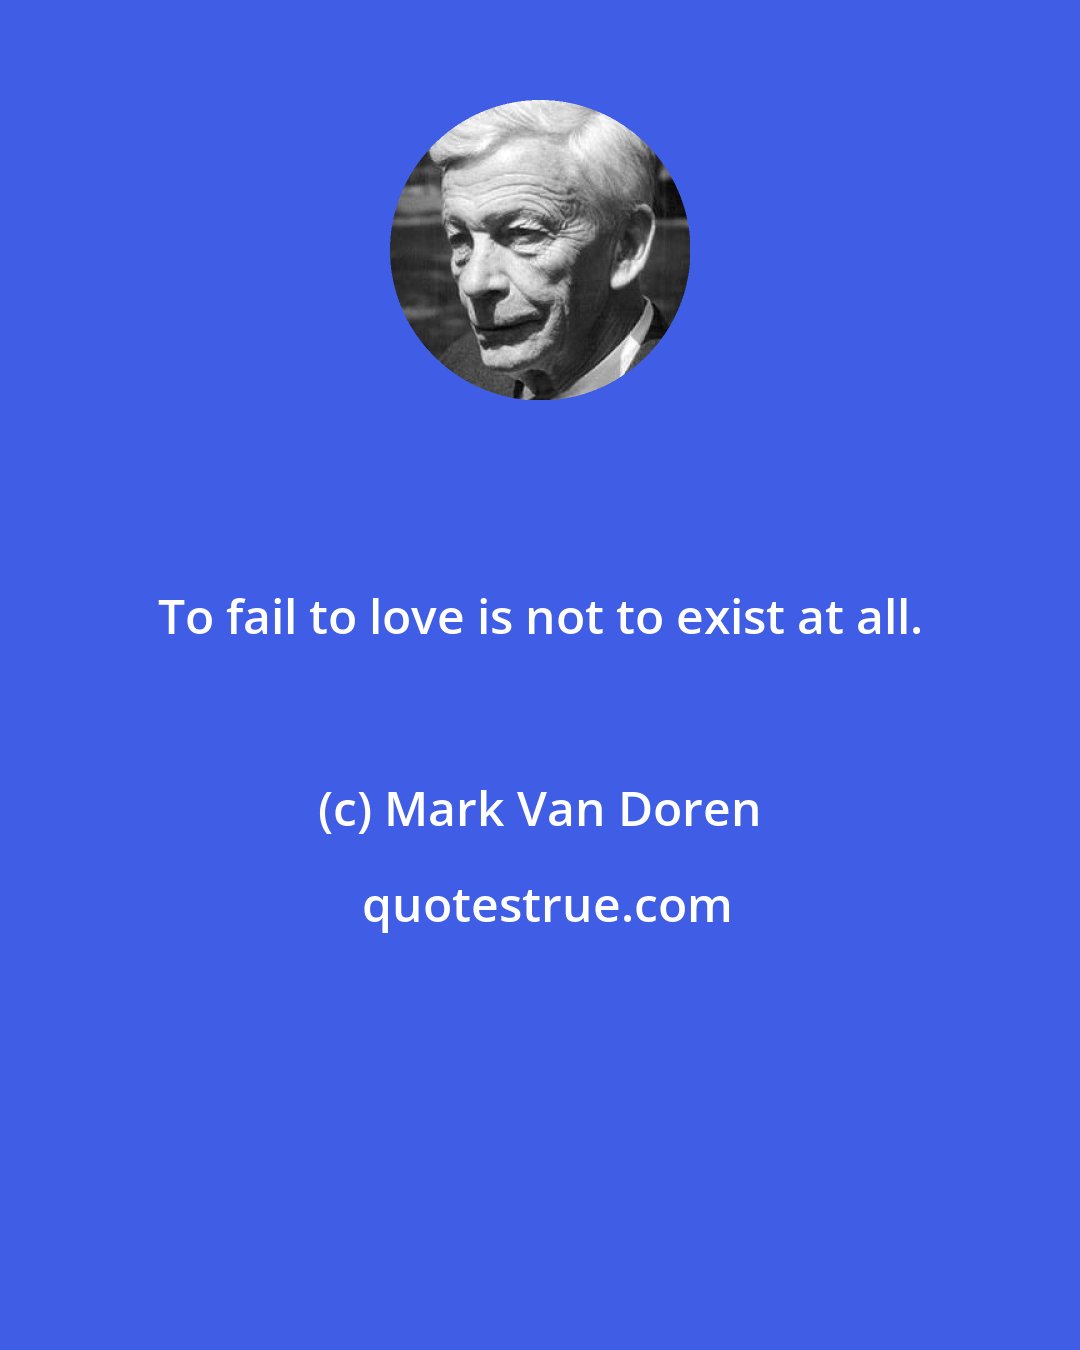 Mark Van Doren: To fail to love is not to exist at all.